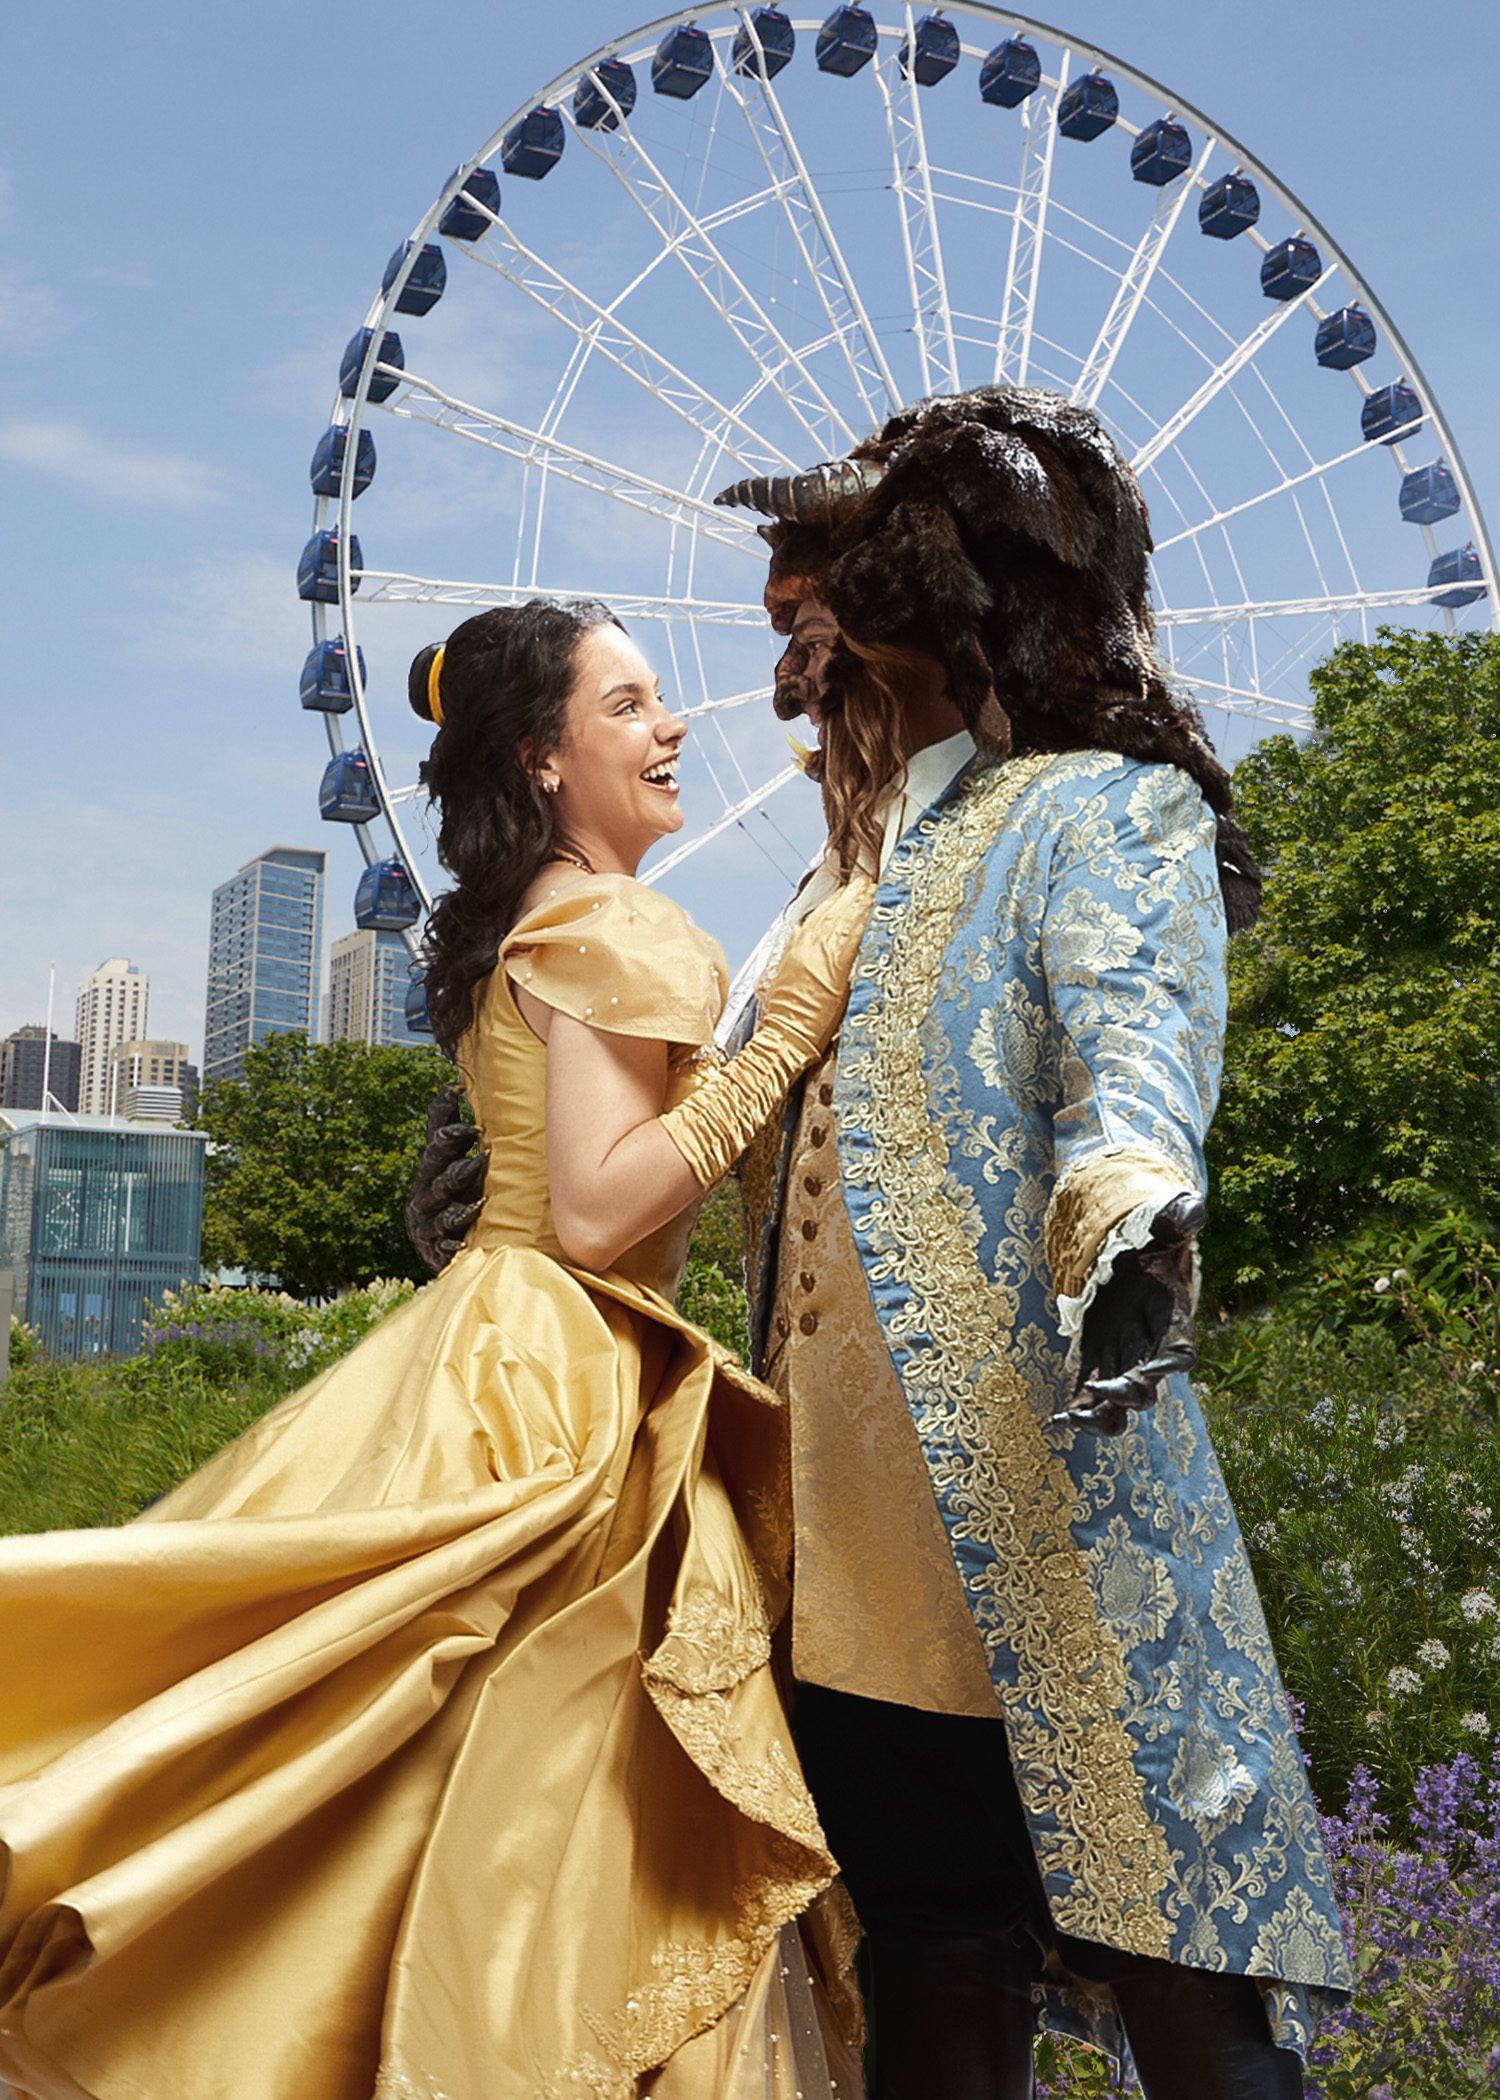 Beauty and the Beast with the Centennial Wheel at Navy Pier